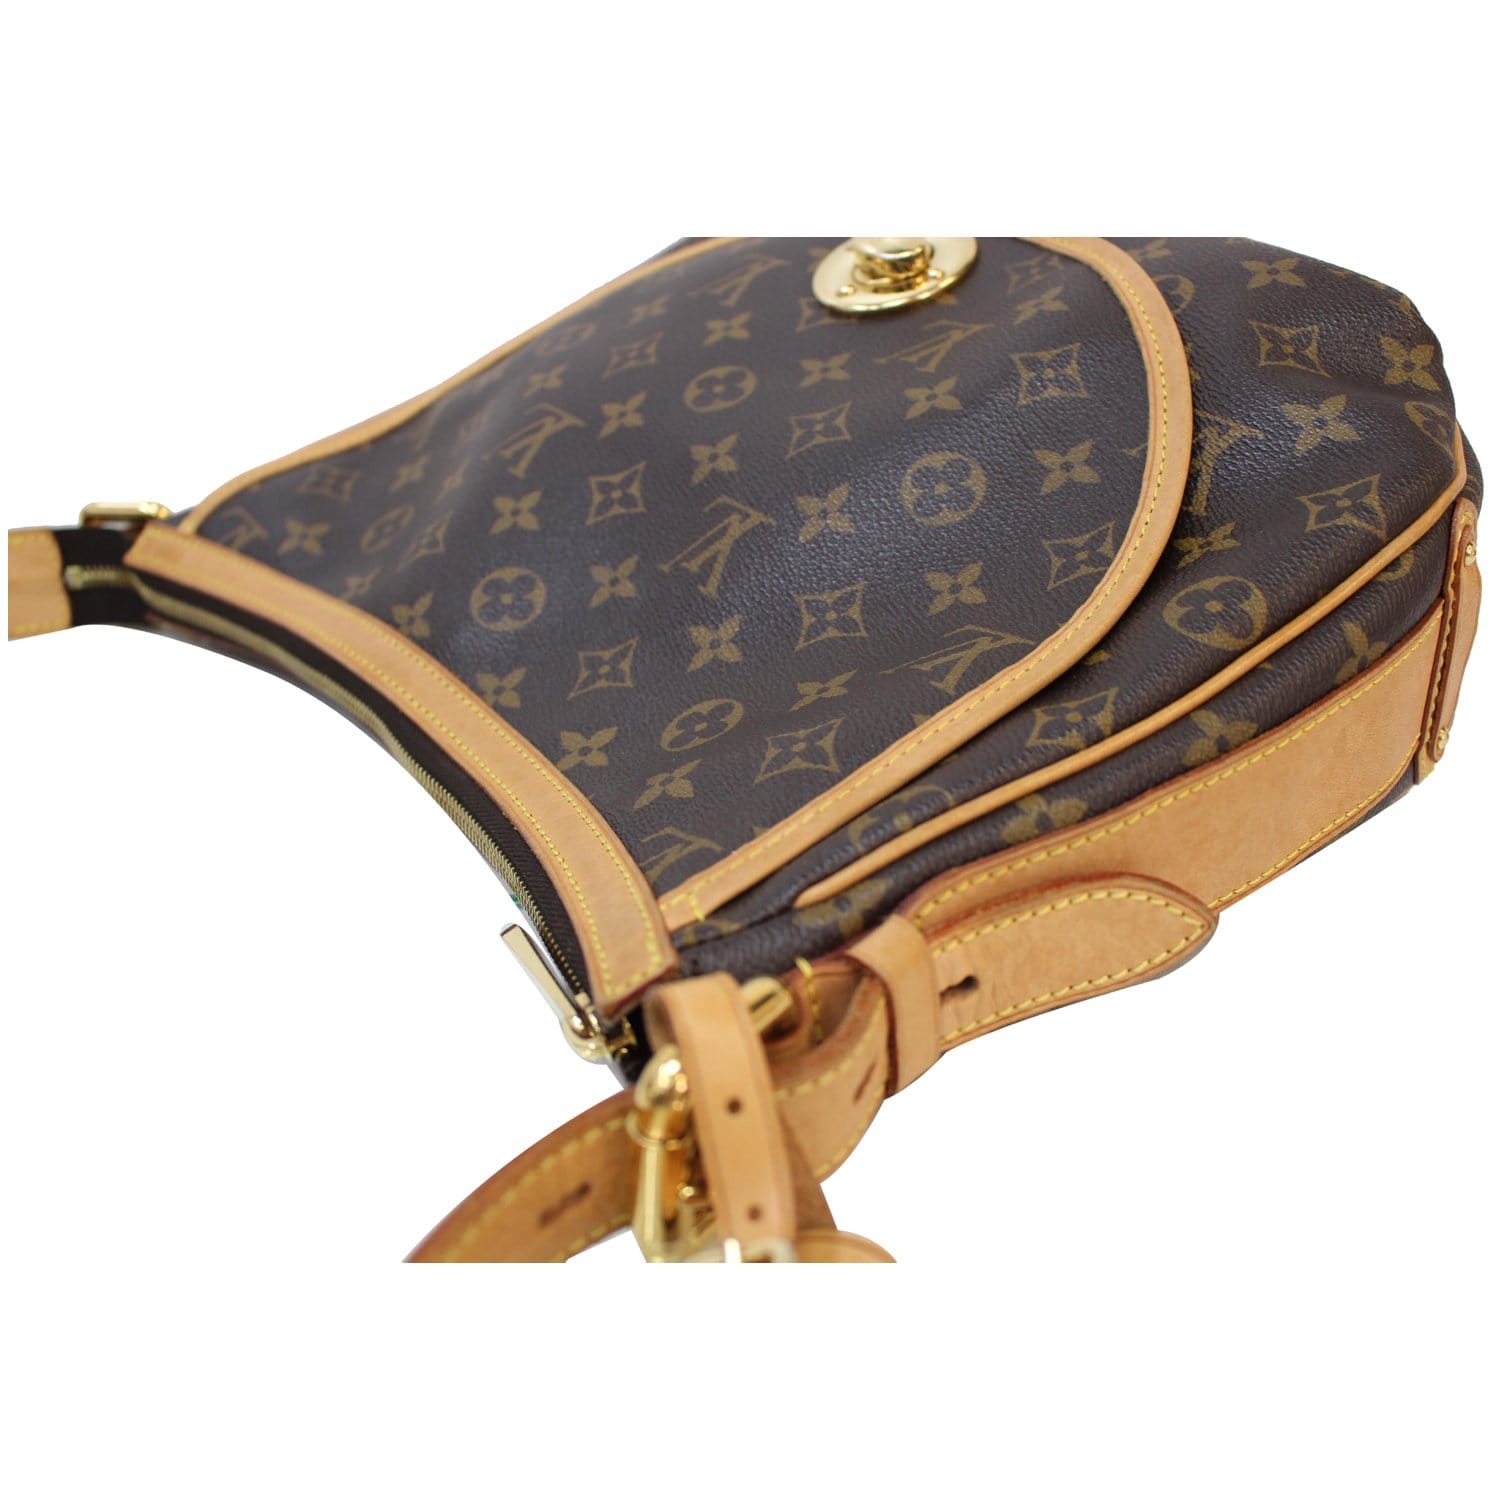 Louis Vuitton, Bags, Sold On Tradesy Louis Vuitton Tulum Gm Authentic